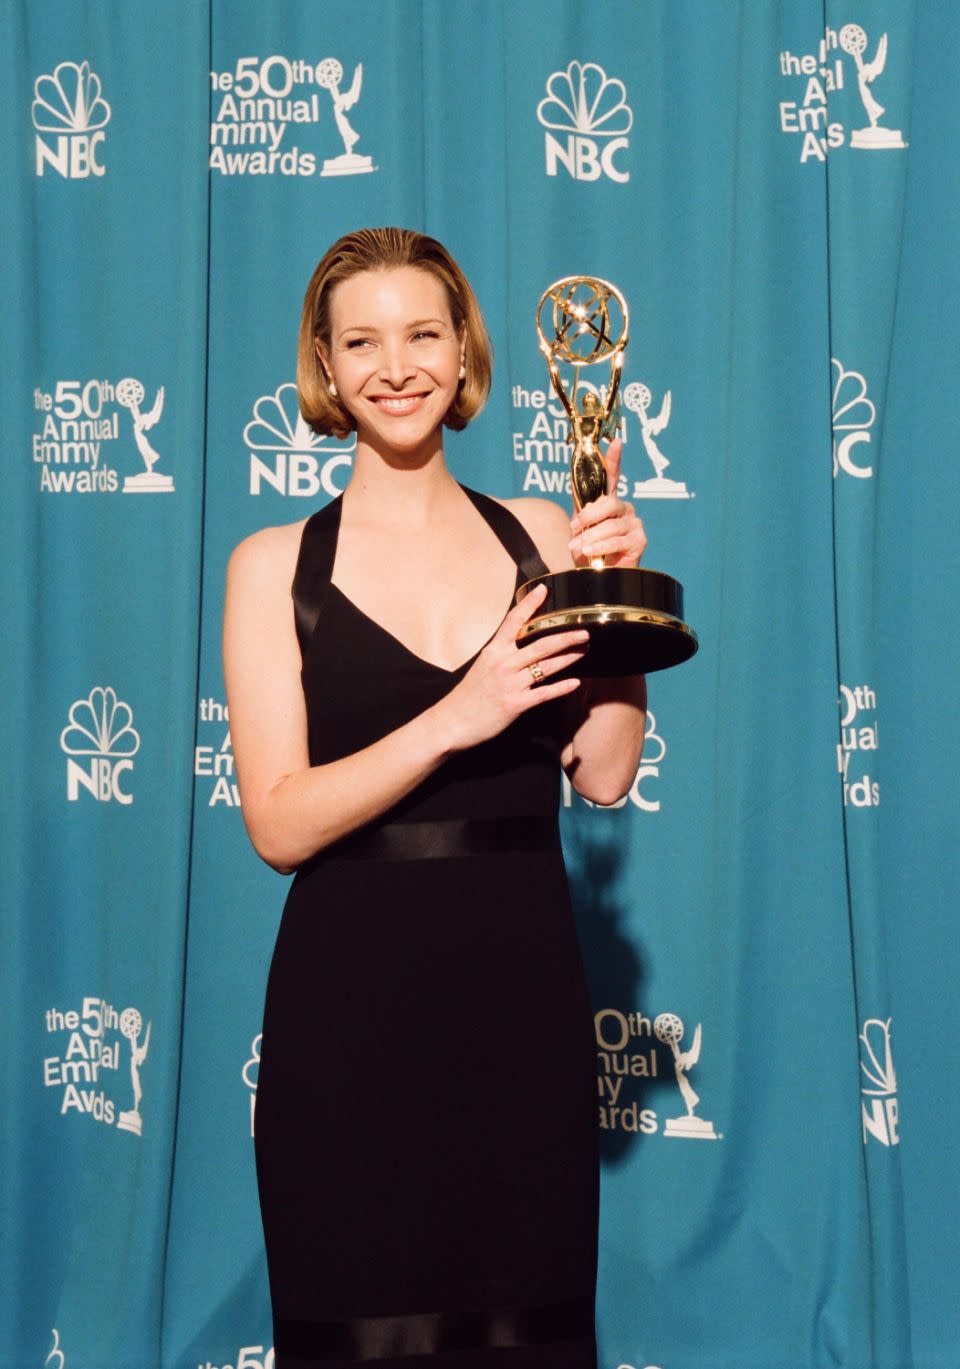 Worth the struggle: the actress was awarded an Emmy for her role on Friends. Source: Getty